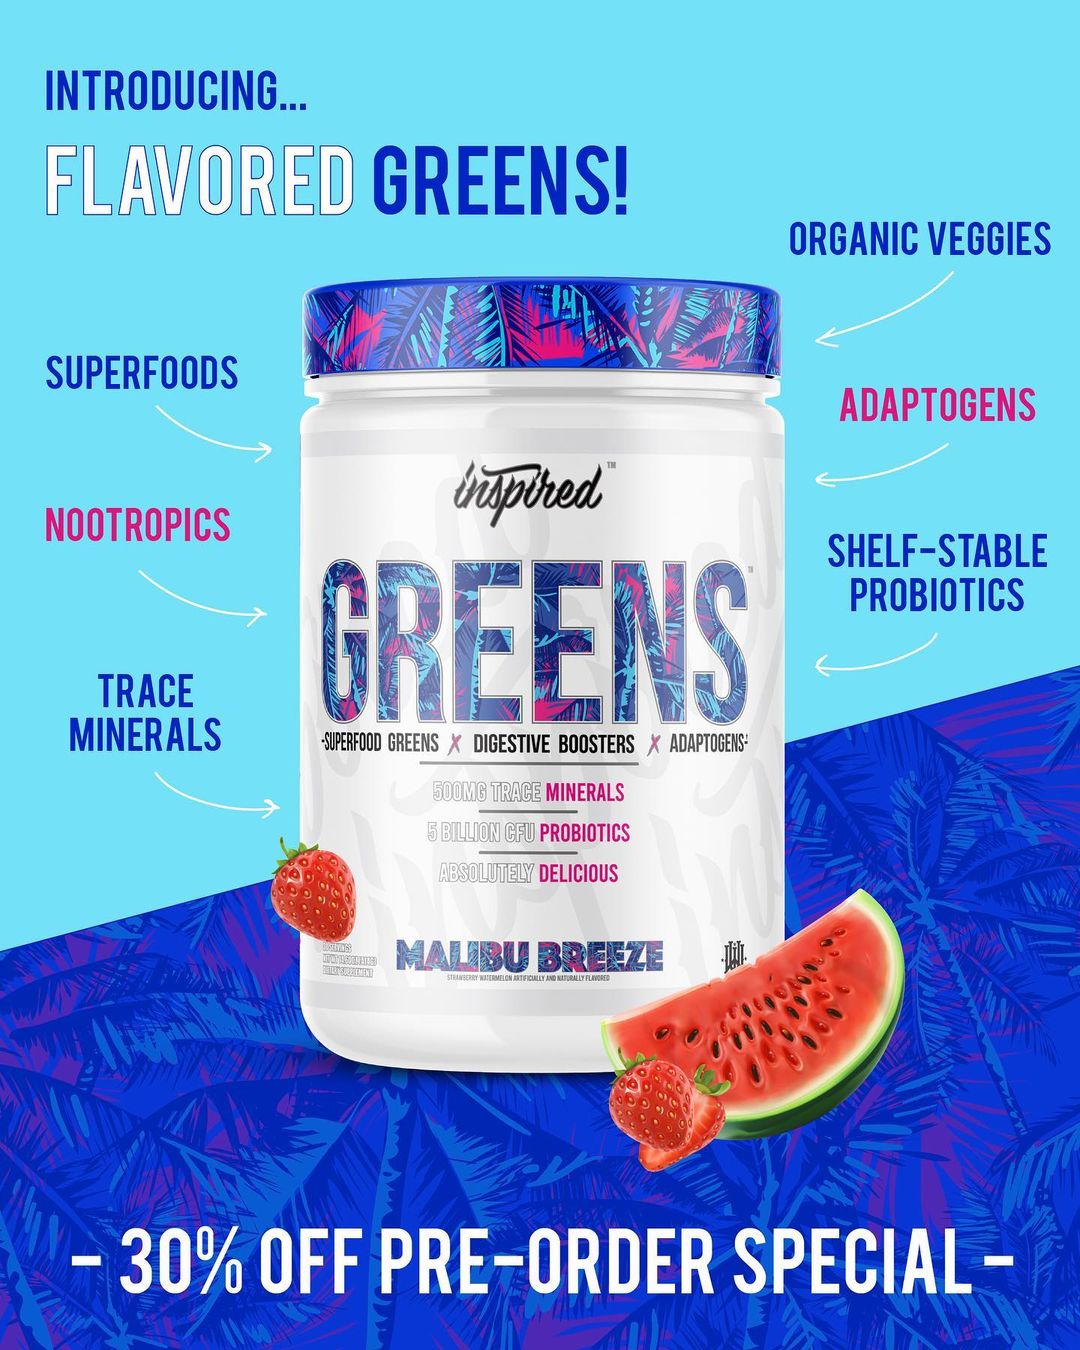 Inspired Nutra Greens Benefits